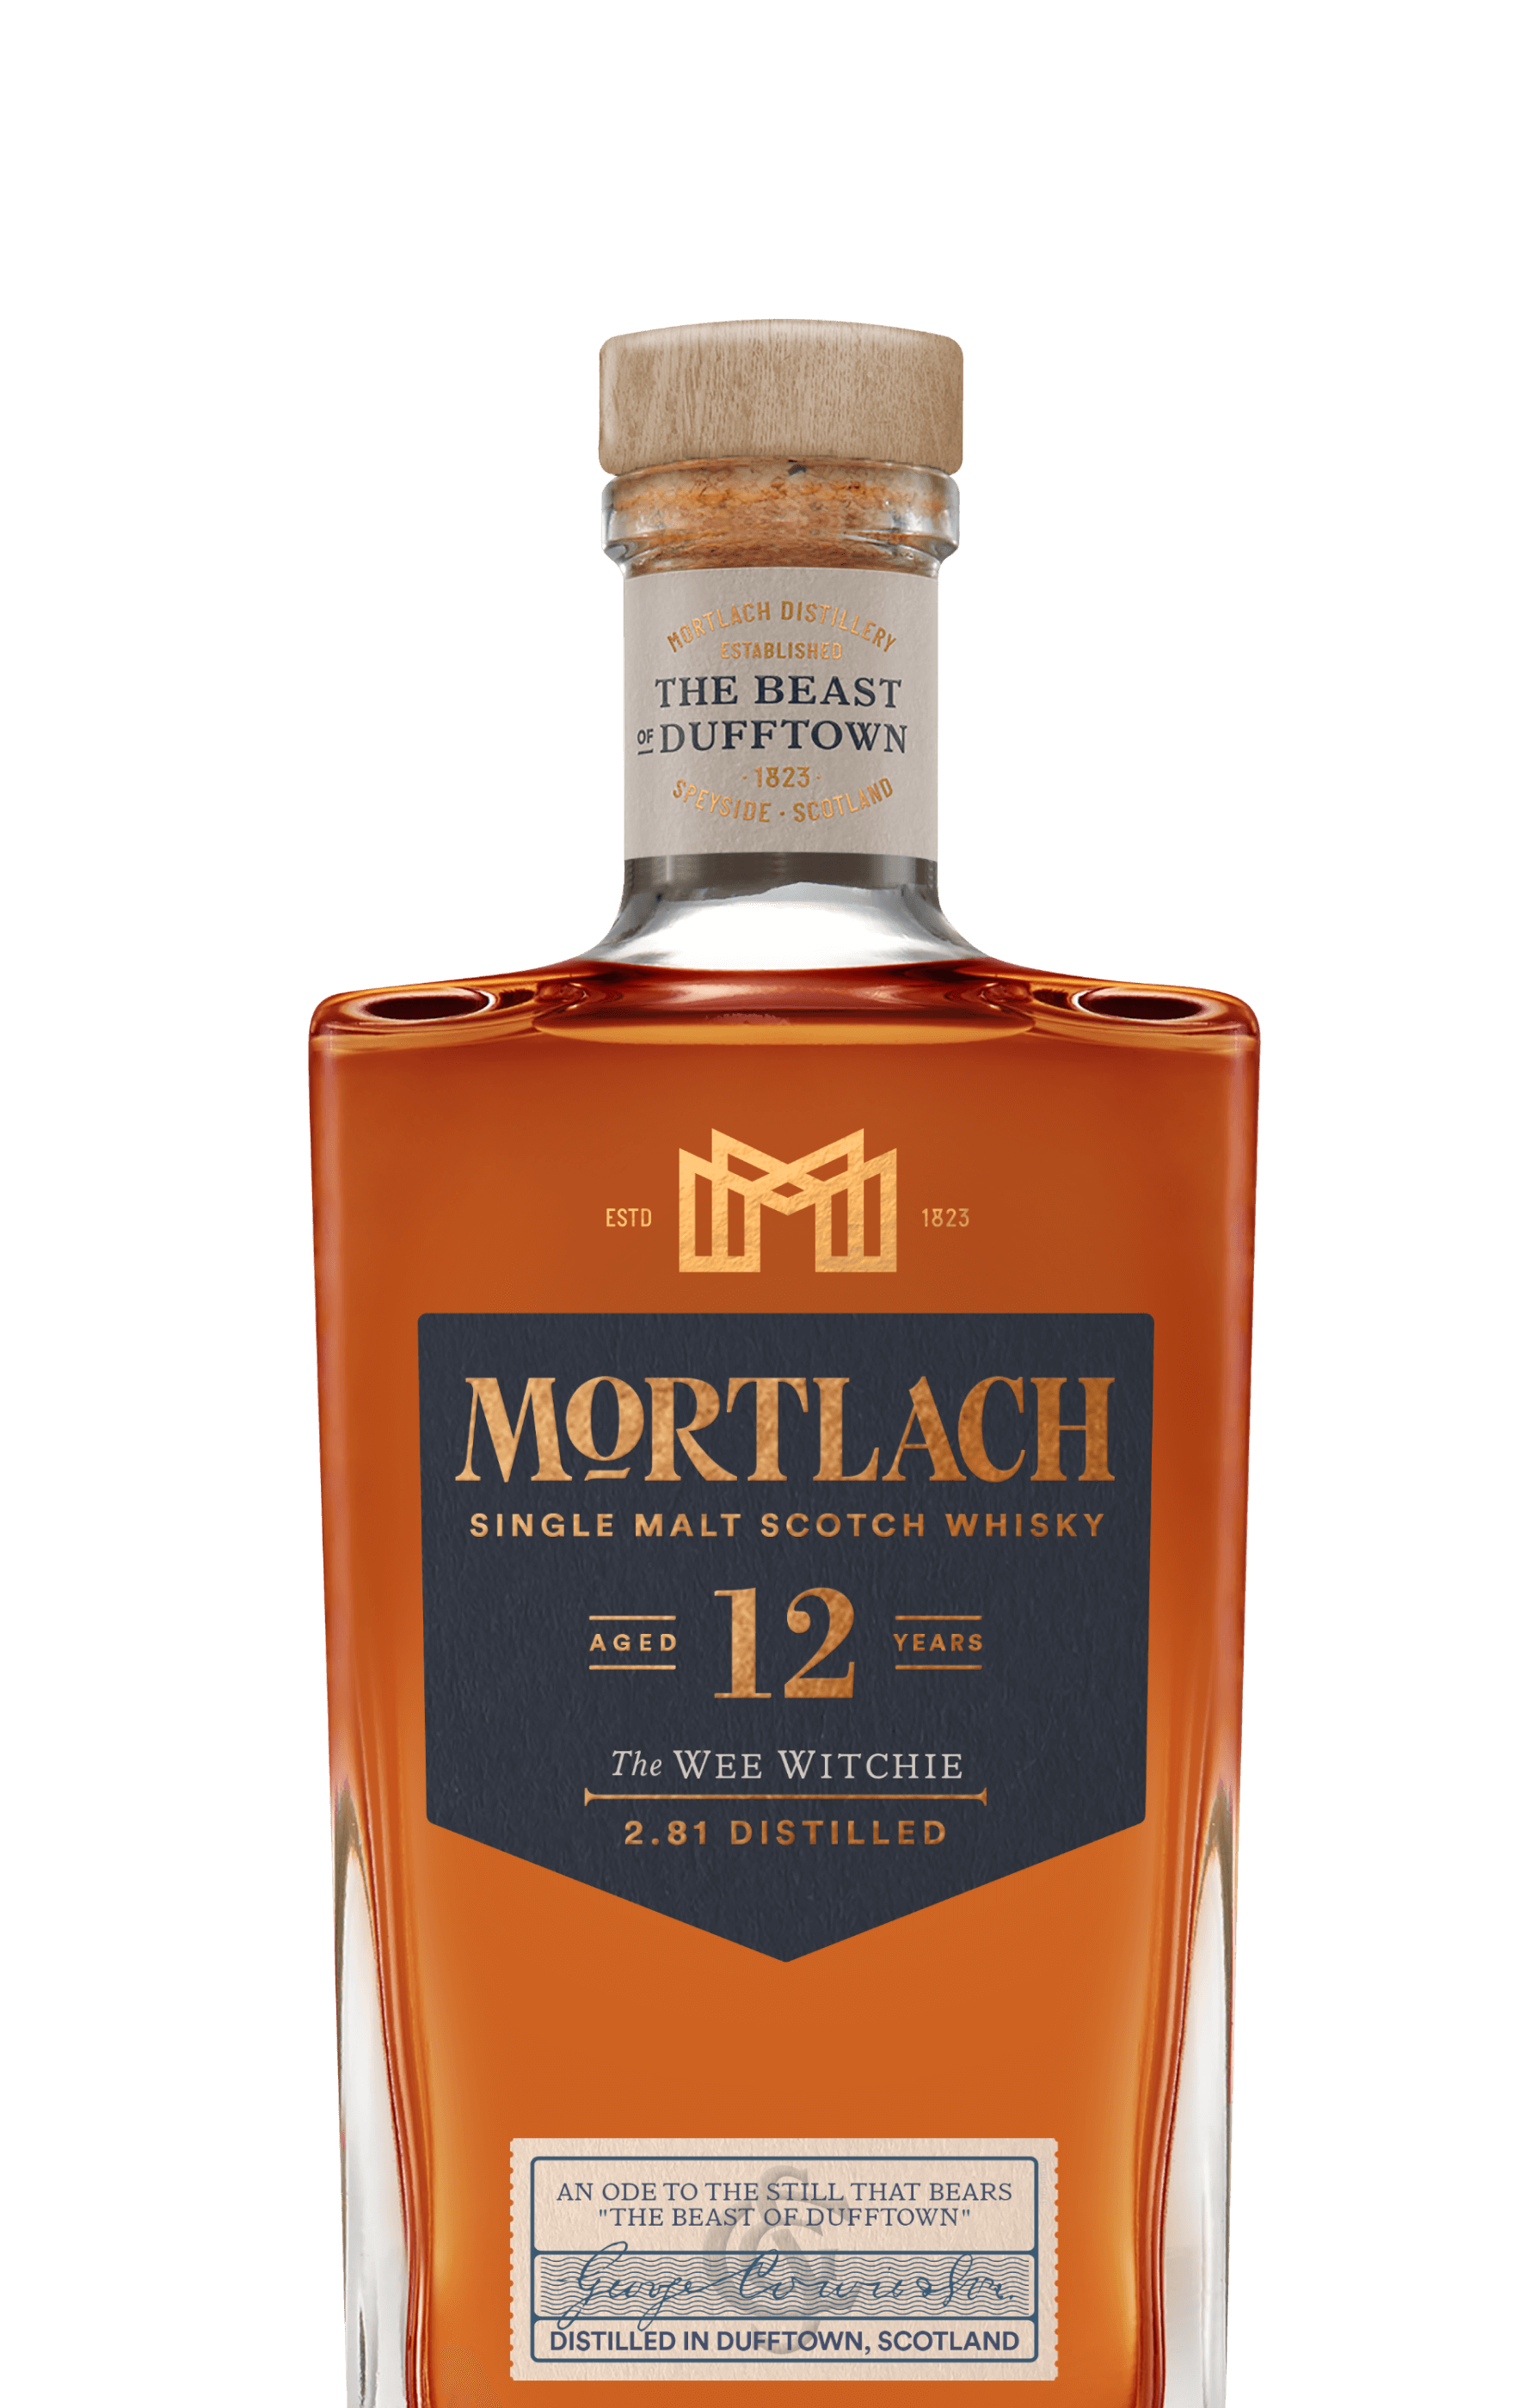 Mortlach 12 Year Old Scotch Whisky